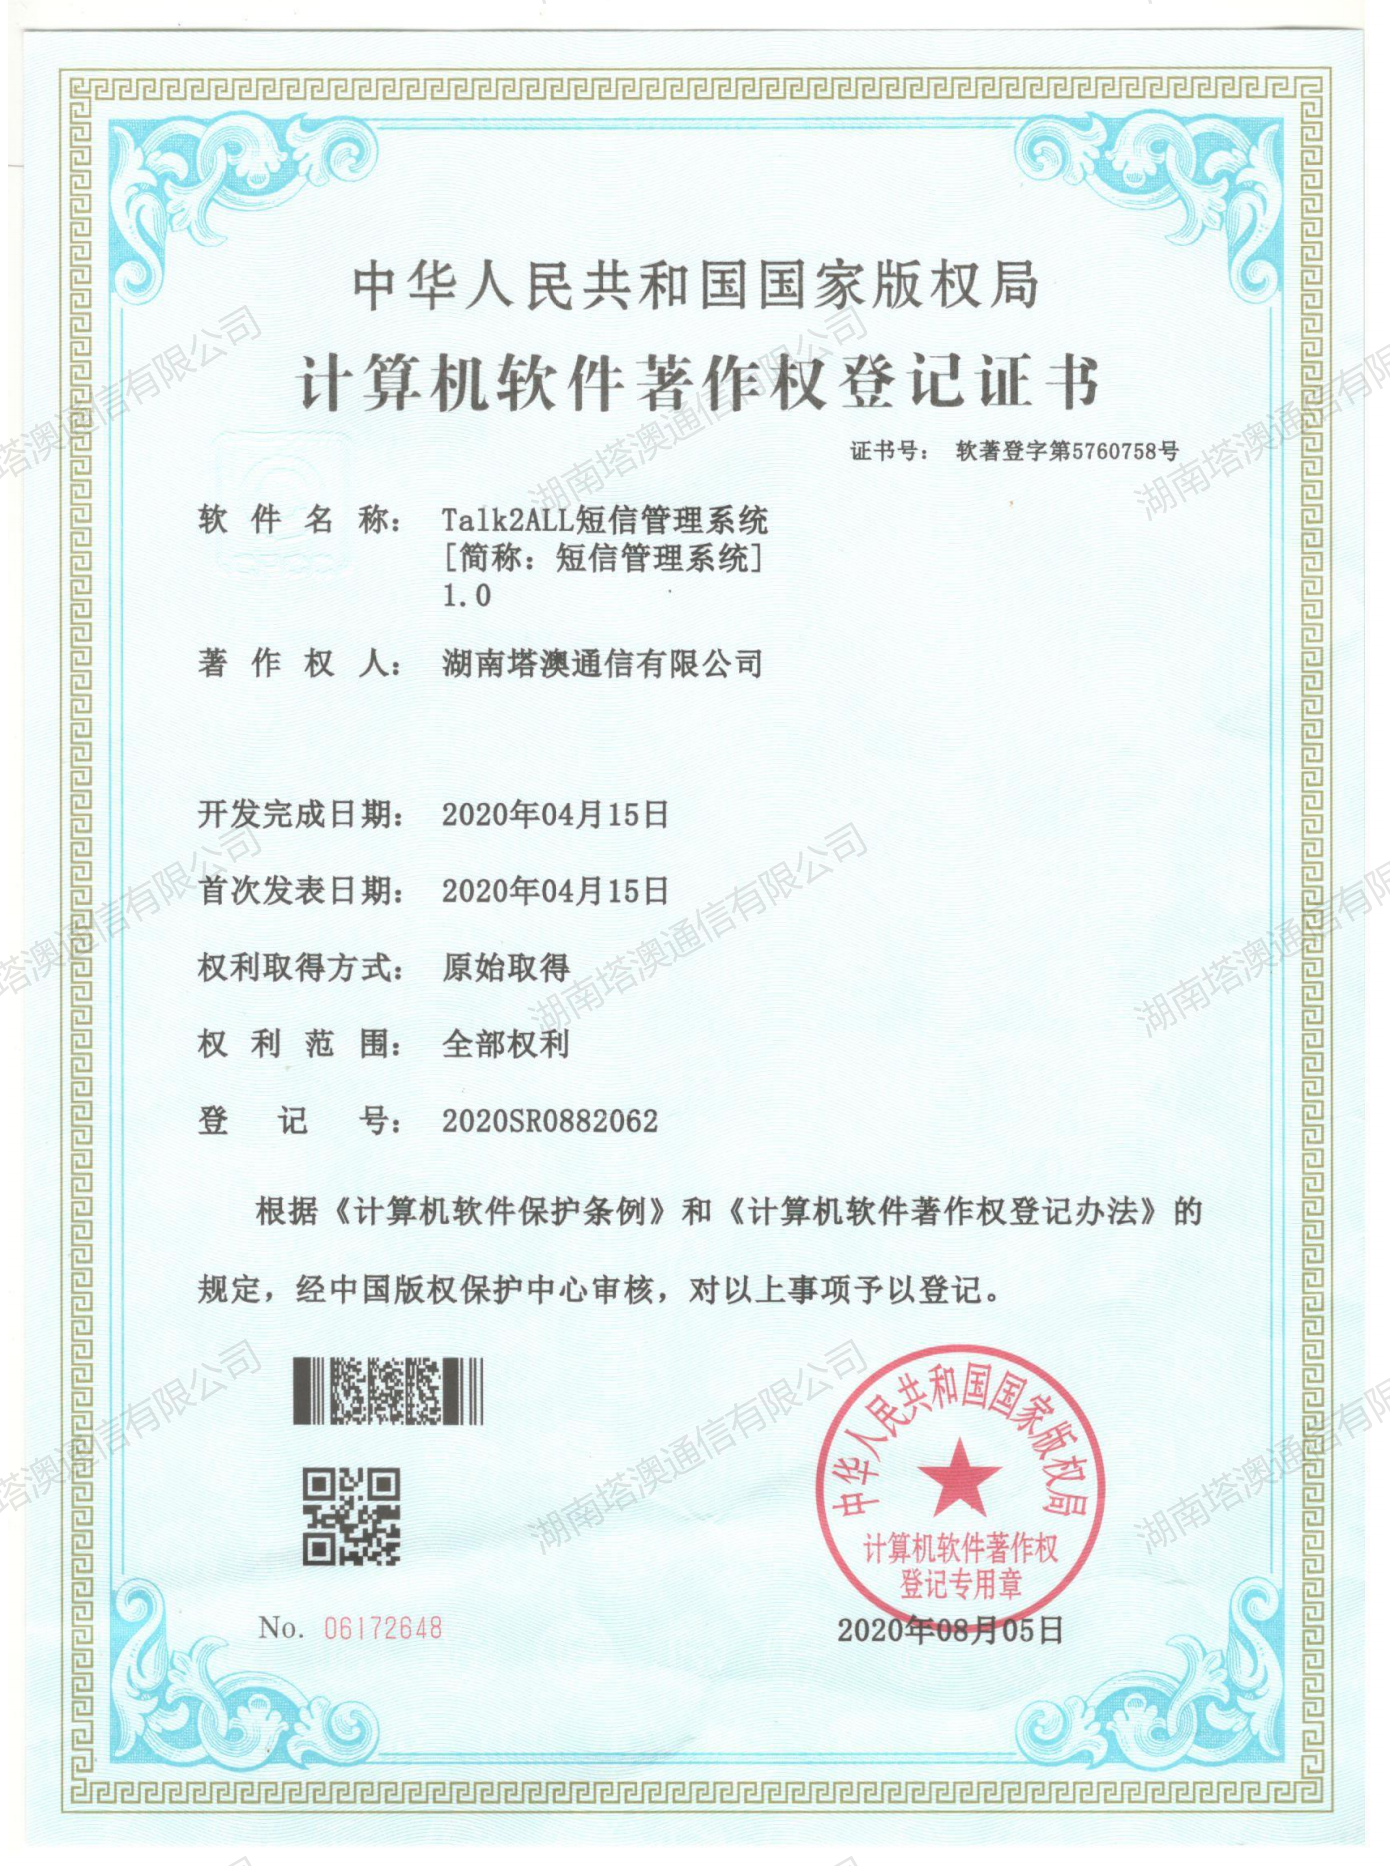 SMS management system software copyright certificate